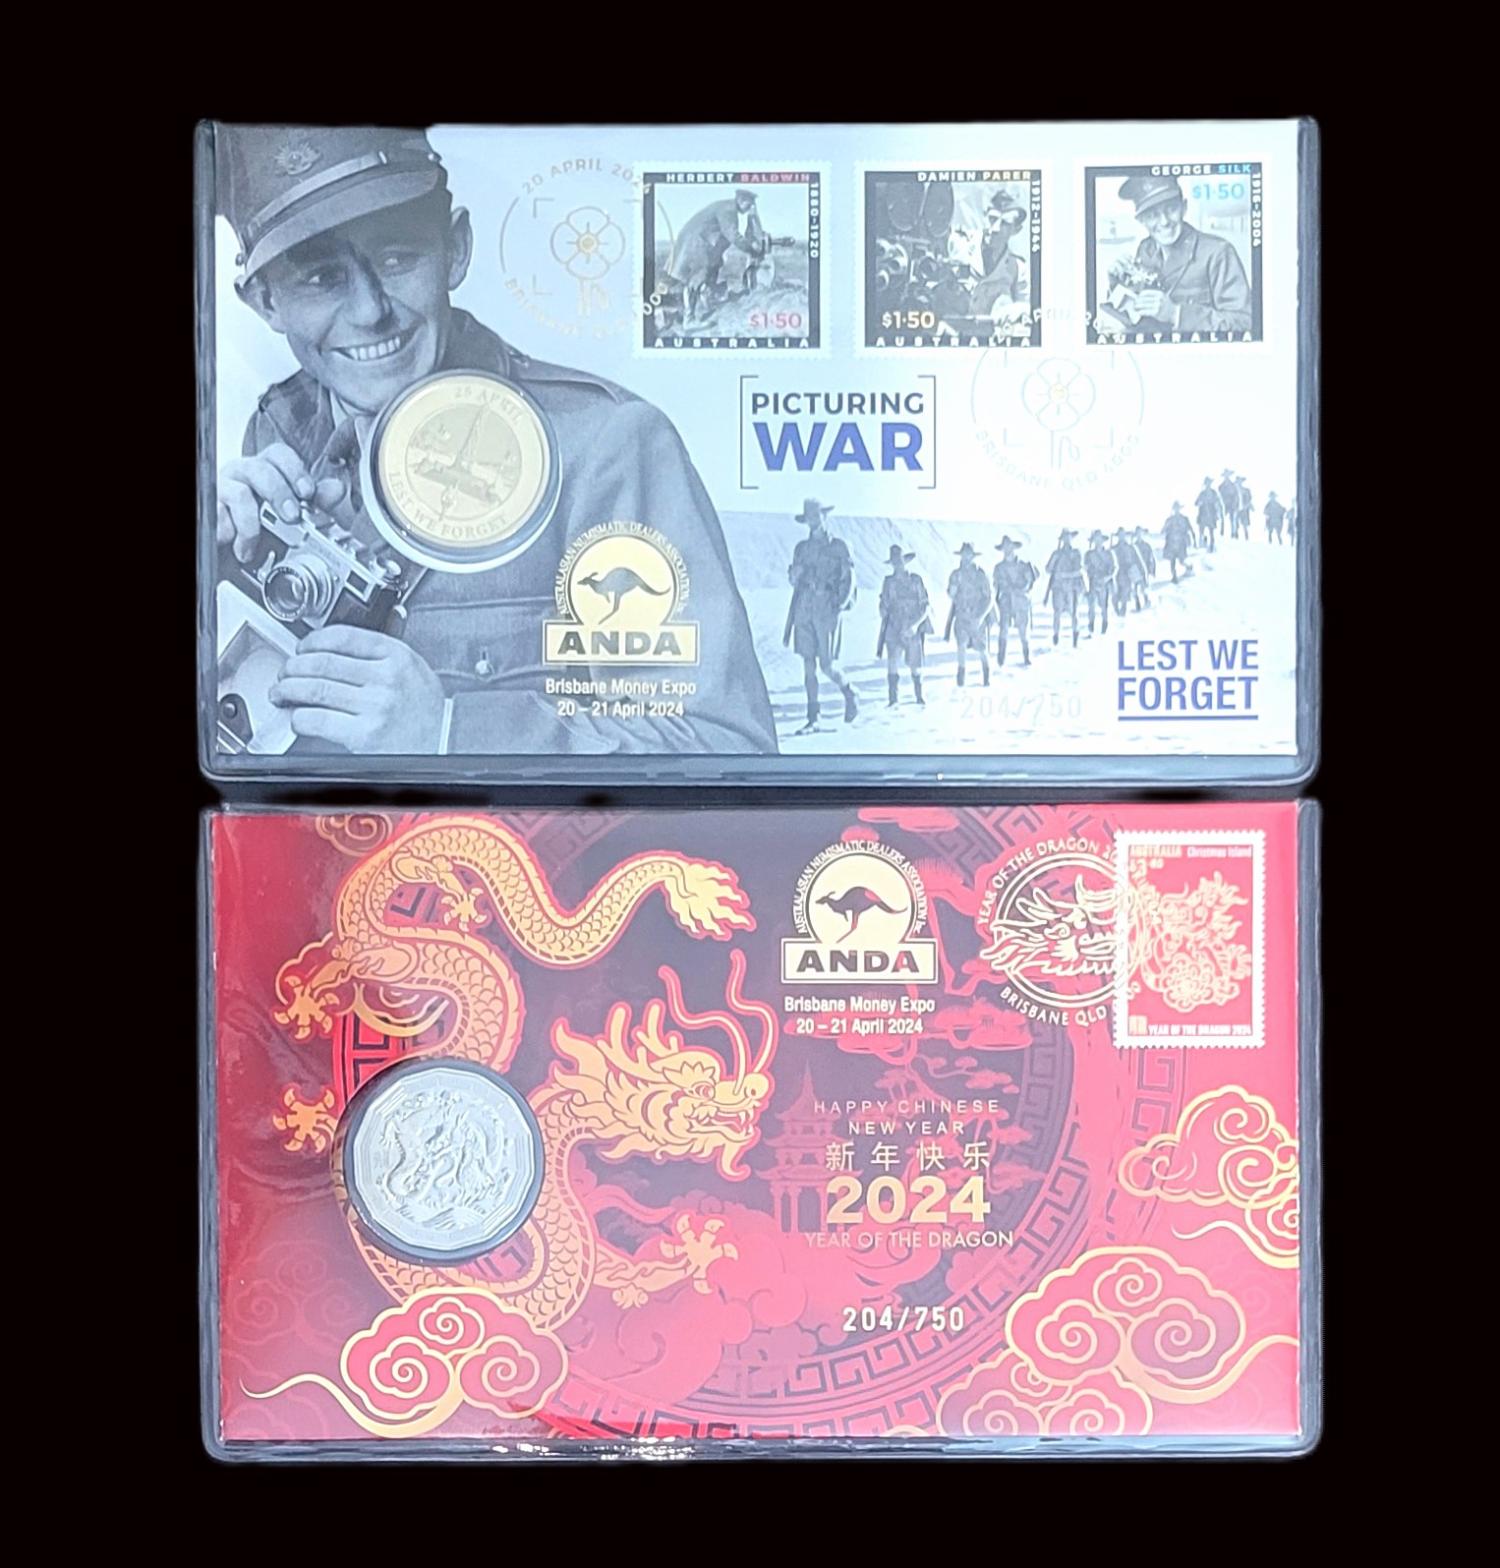 Thumbnail for 2024 PNC Duo - Issued for Brisbane Money Expo ANDA Show - Happy Chinese New Year 2024 Year of the Dragon RAM 50 cent Coin & Perth Mint Picturing War Lest we Forget with $1 coin PNCs 204-750